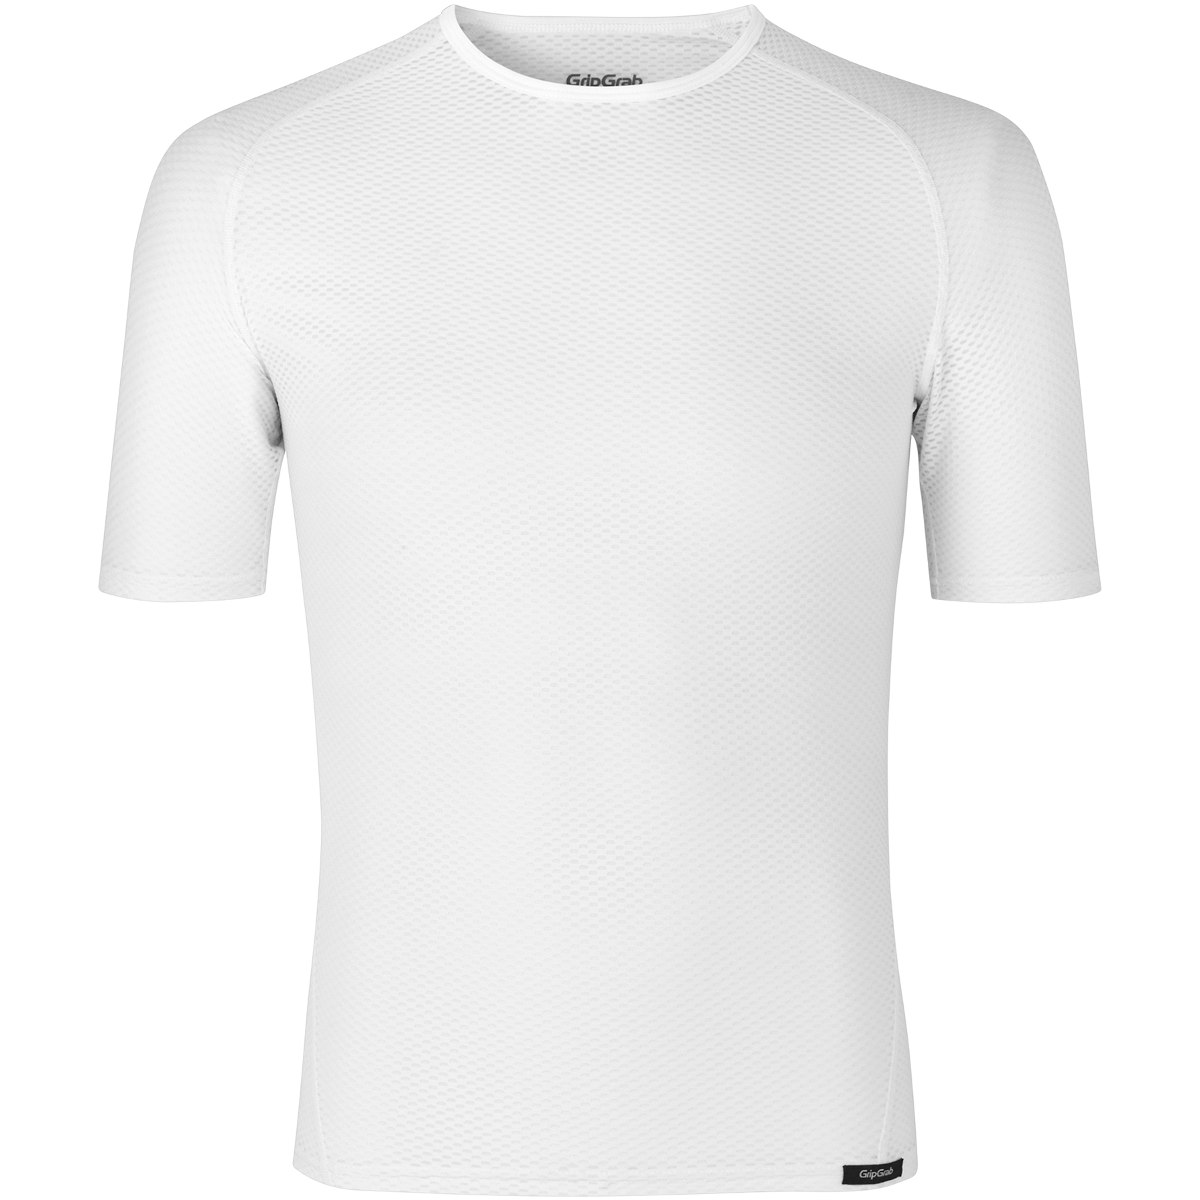 Picture of GripGrab Ultralight Mesh Short Sleeve Base Layer - White